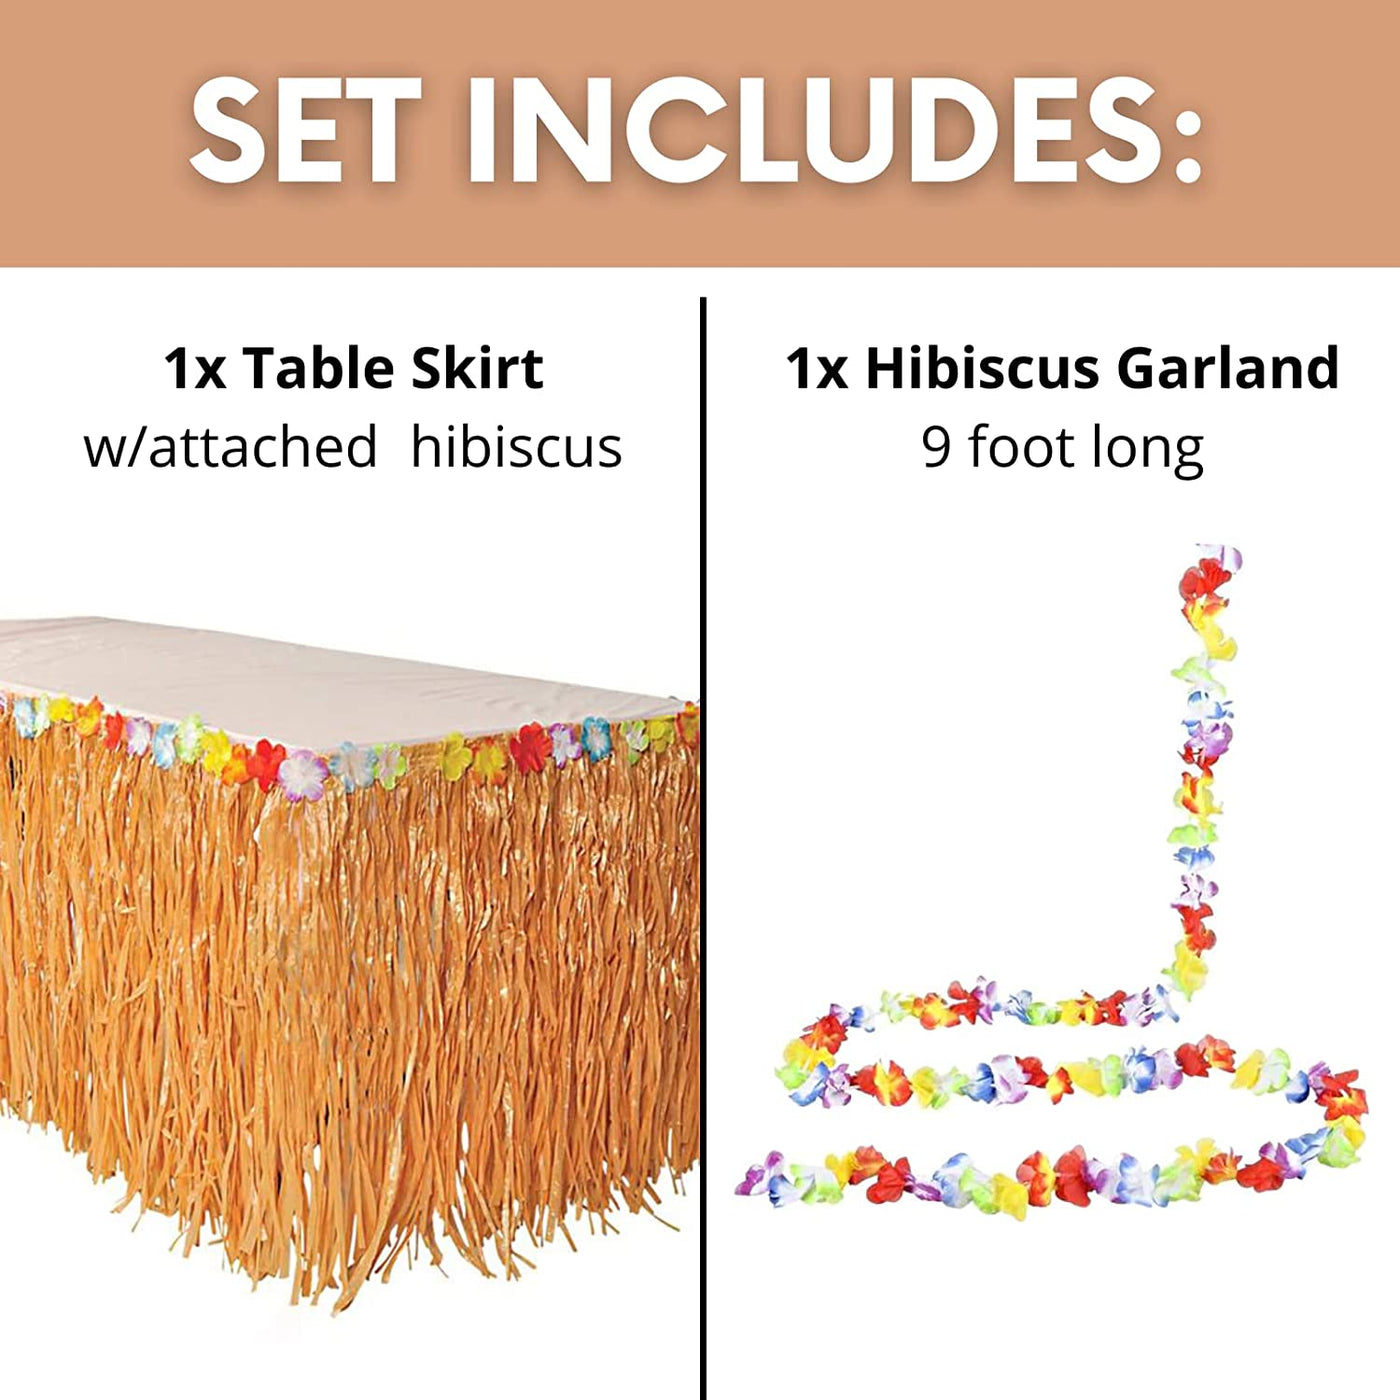 9 Ft Grass Table Skirt with 9ft Hibiscus Garland - for Luau Party Decorations, Hawaiian Tropical Moana Birthday Party Supplies & Accessories by 4E's Novelty